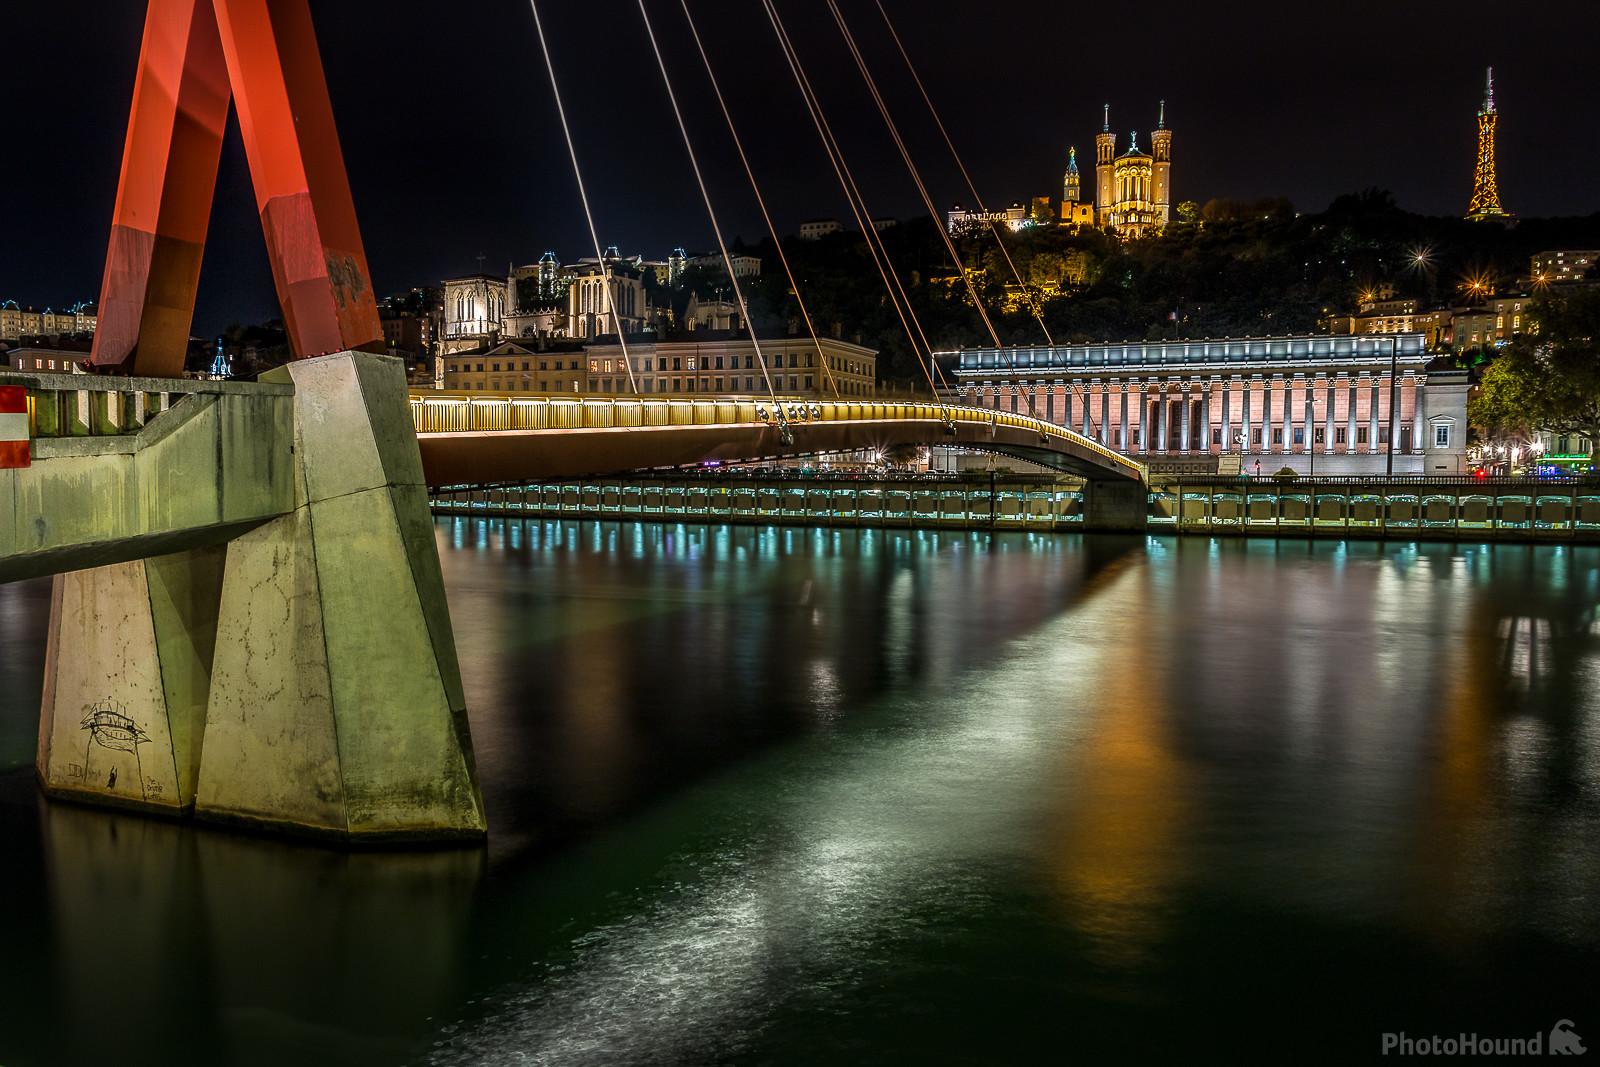 Image of The Saone view from the Palace of Justice Footbridge by Frédéric Monin